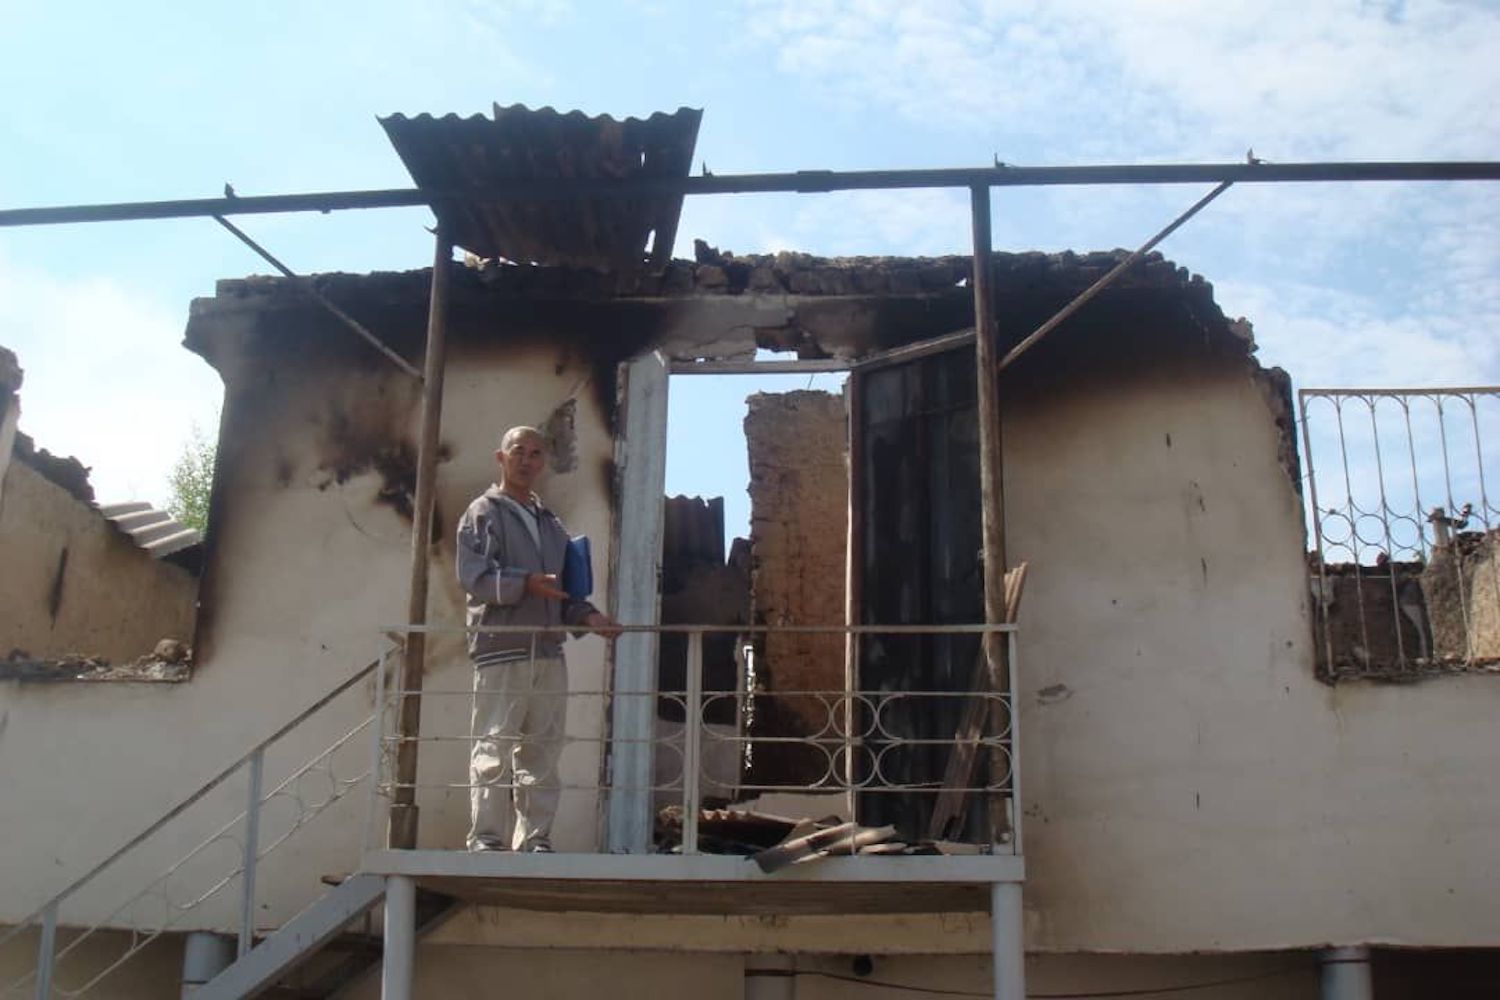 Azimjan standing in front of a burned house following the 2010 South Kyrgyzstan ethnic clashes.